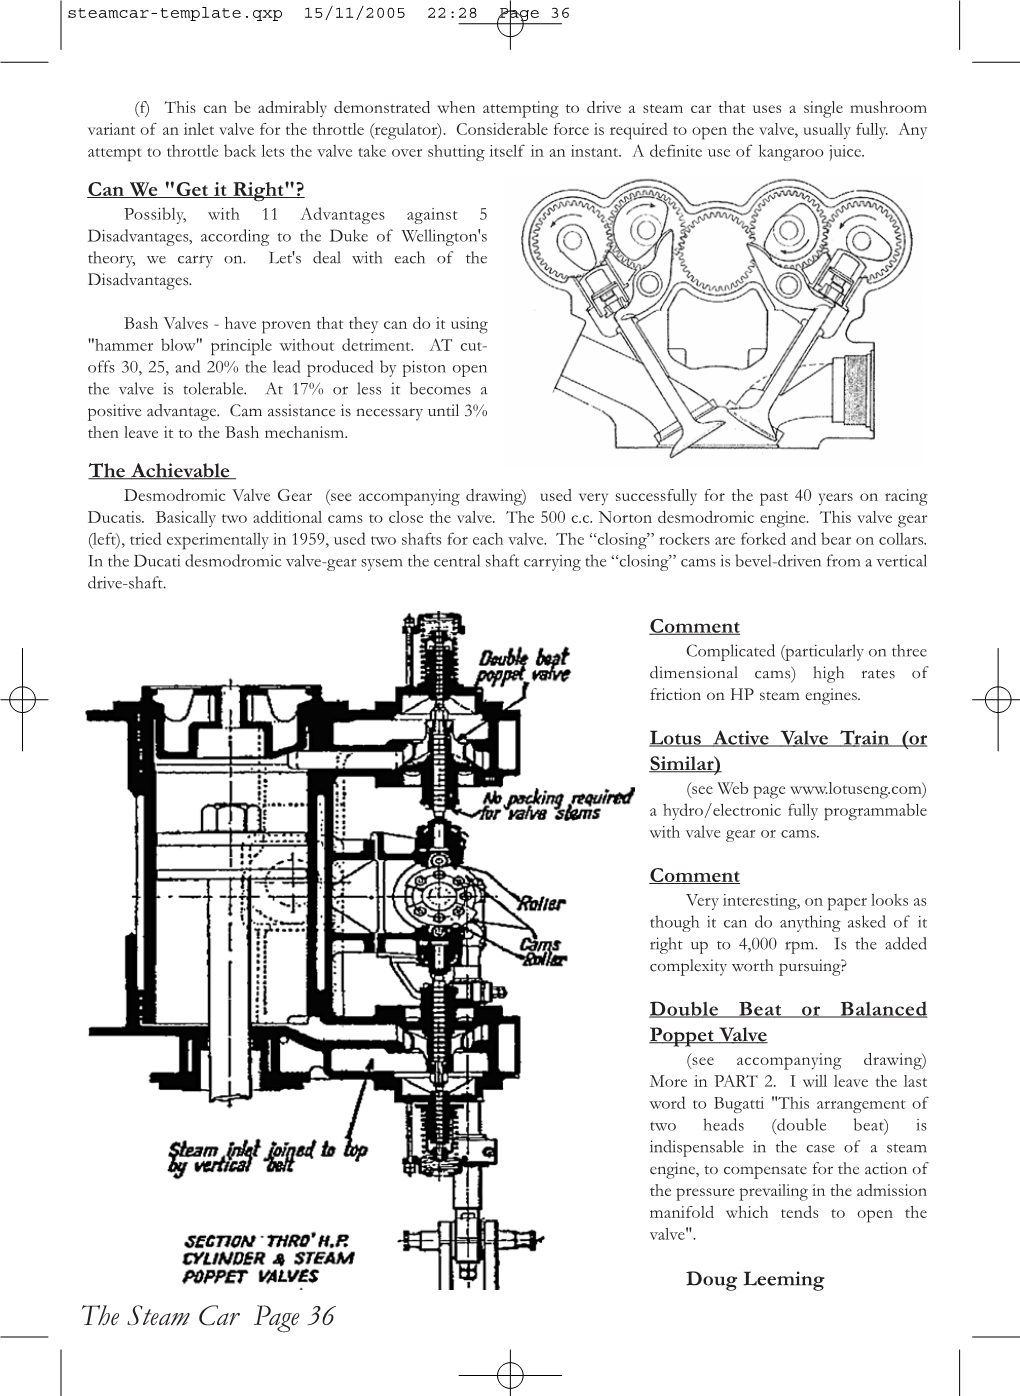 The Steam Car Page 36